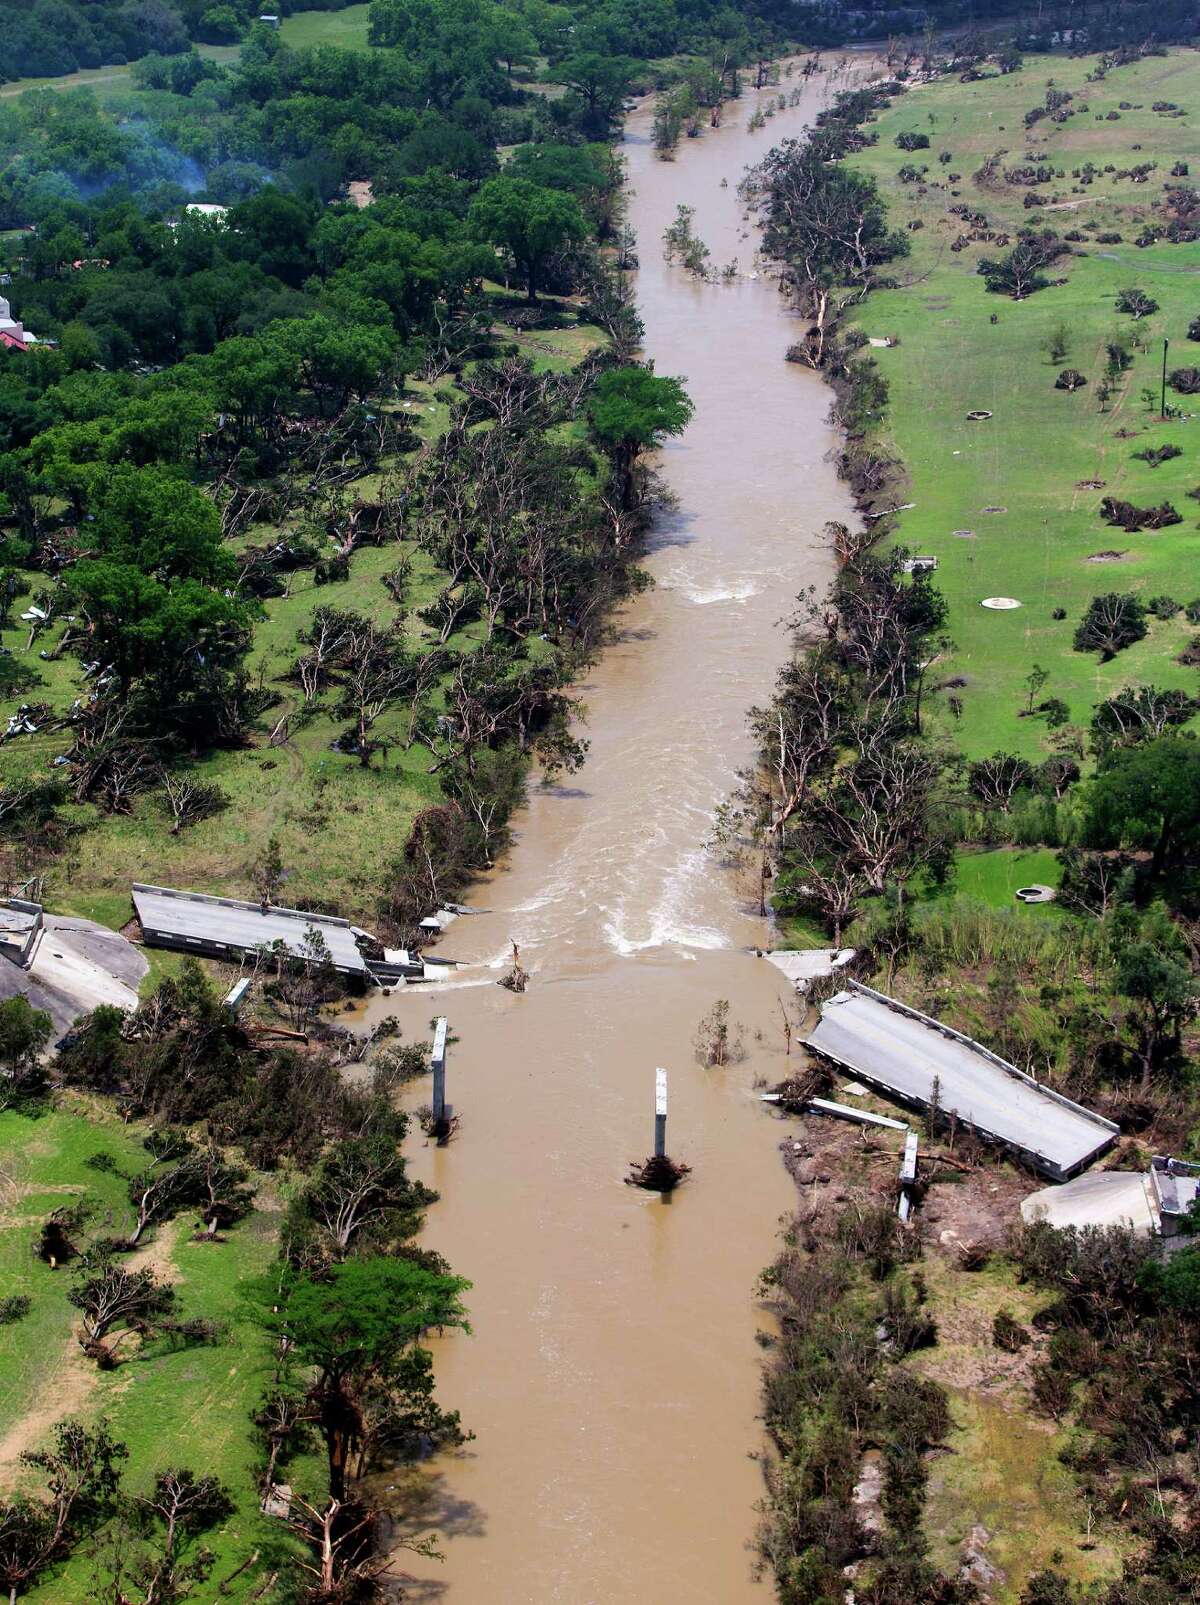 Damage from Memorial Day weekend flooding on the Blanco River in Wimberley is seen in a Tuesday May 26, 2015 aerial picture.